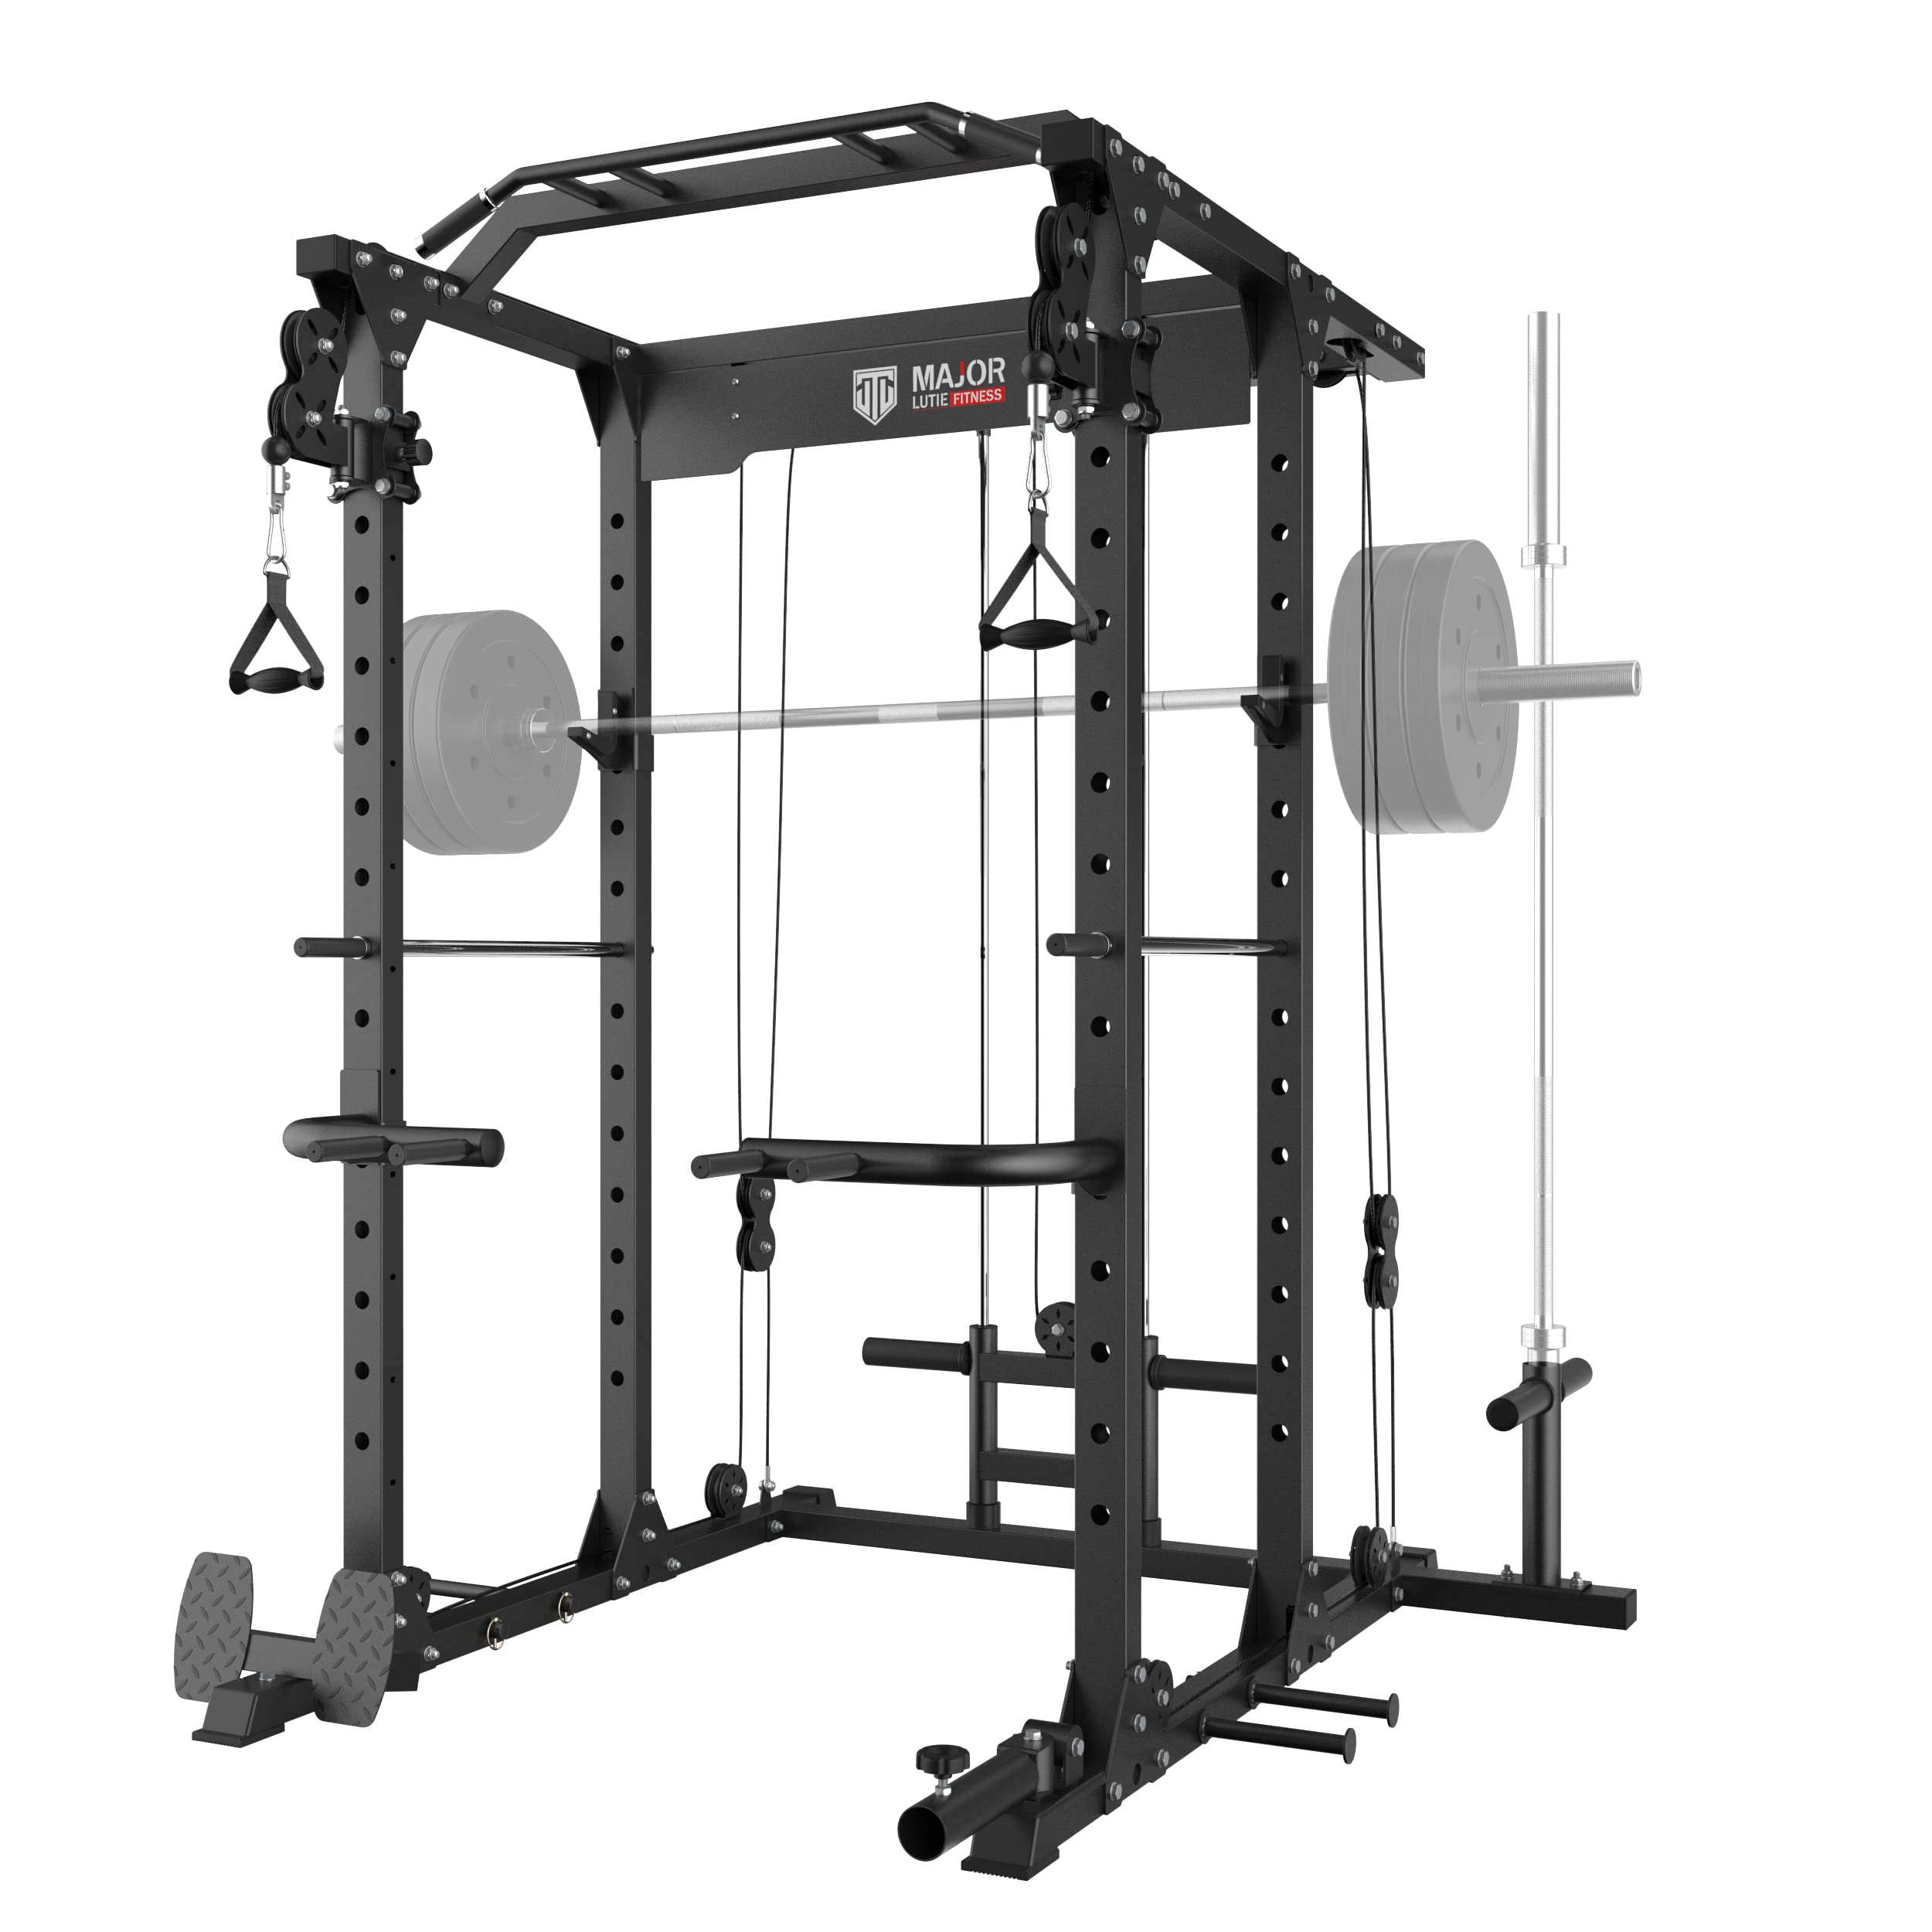 Major Lutie Power Cage, Plm03 1400 Lbs Multi-Function Power Rack With Adjustable Cable Crossover System And More Exercise Machin